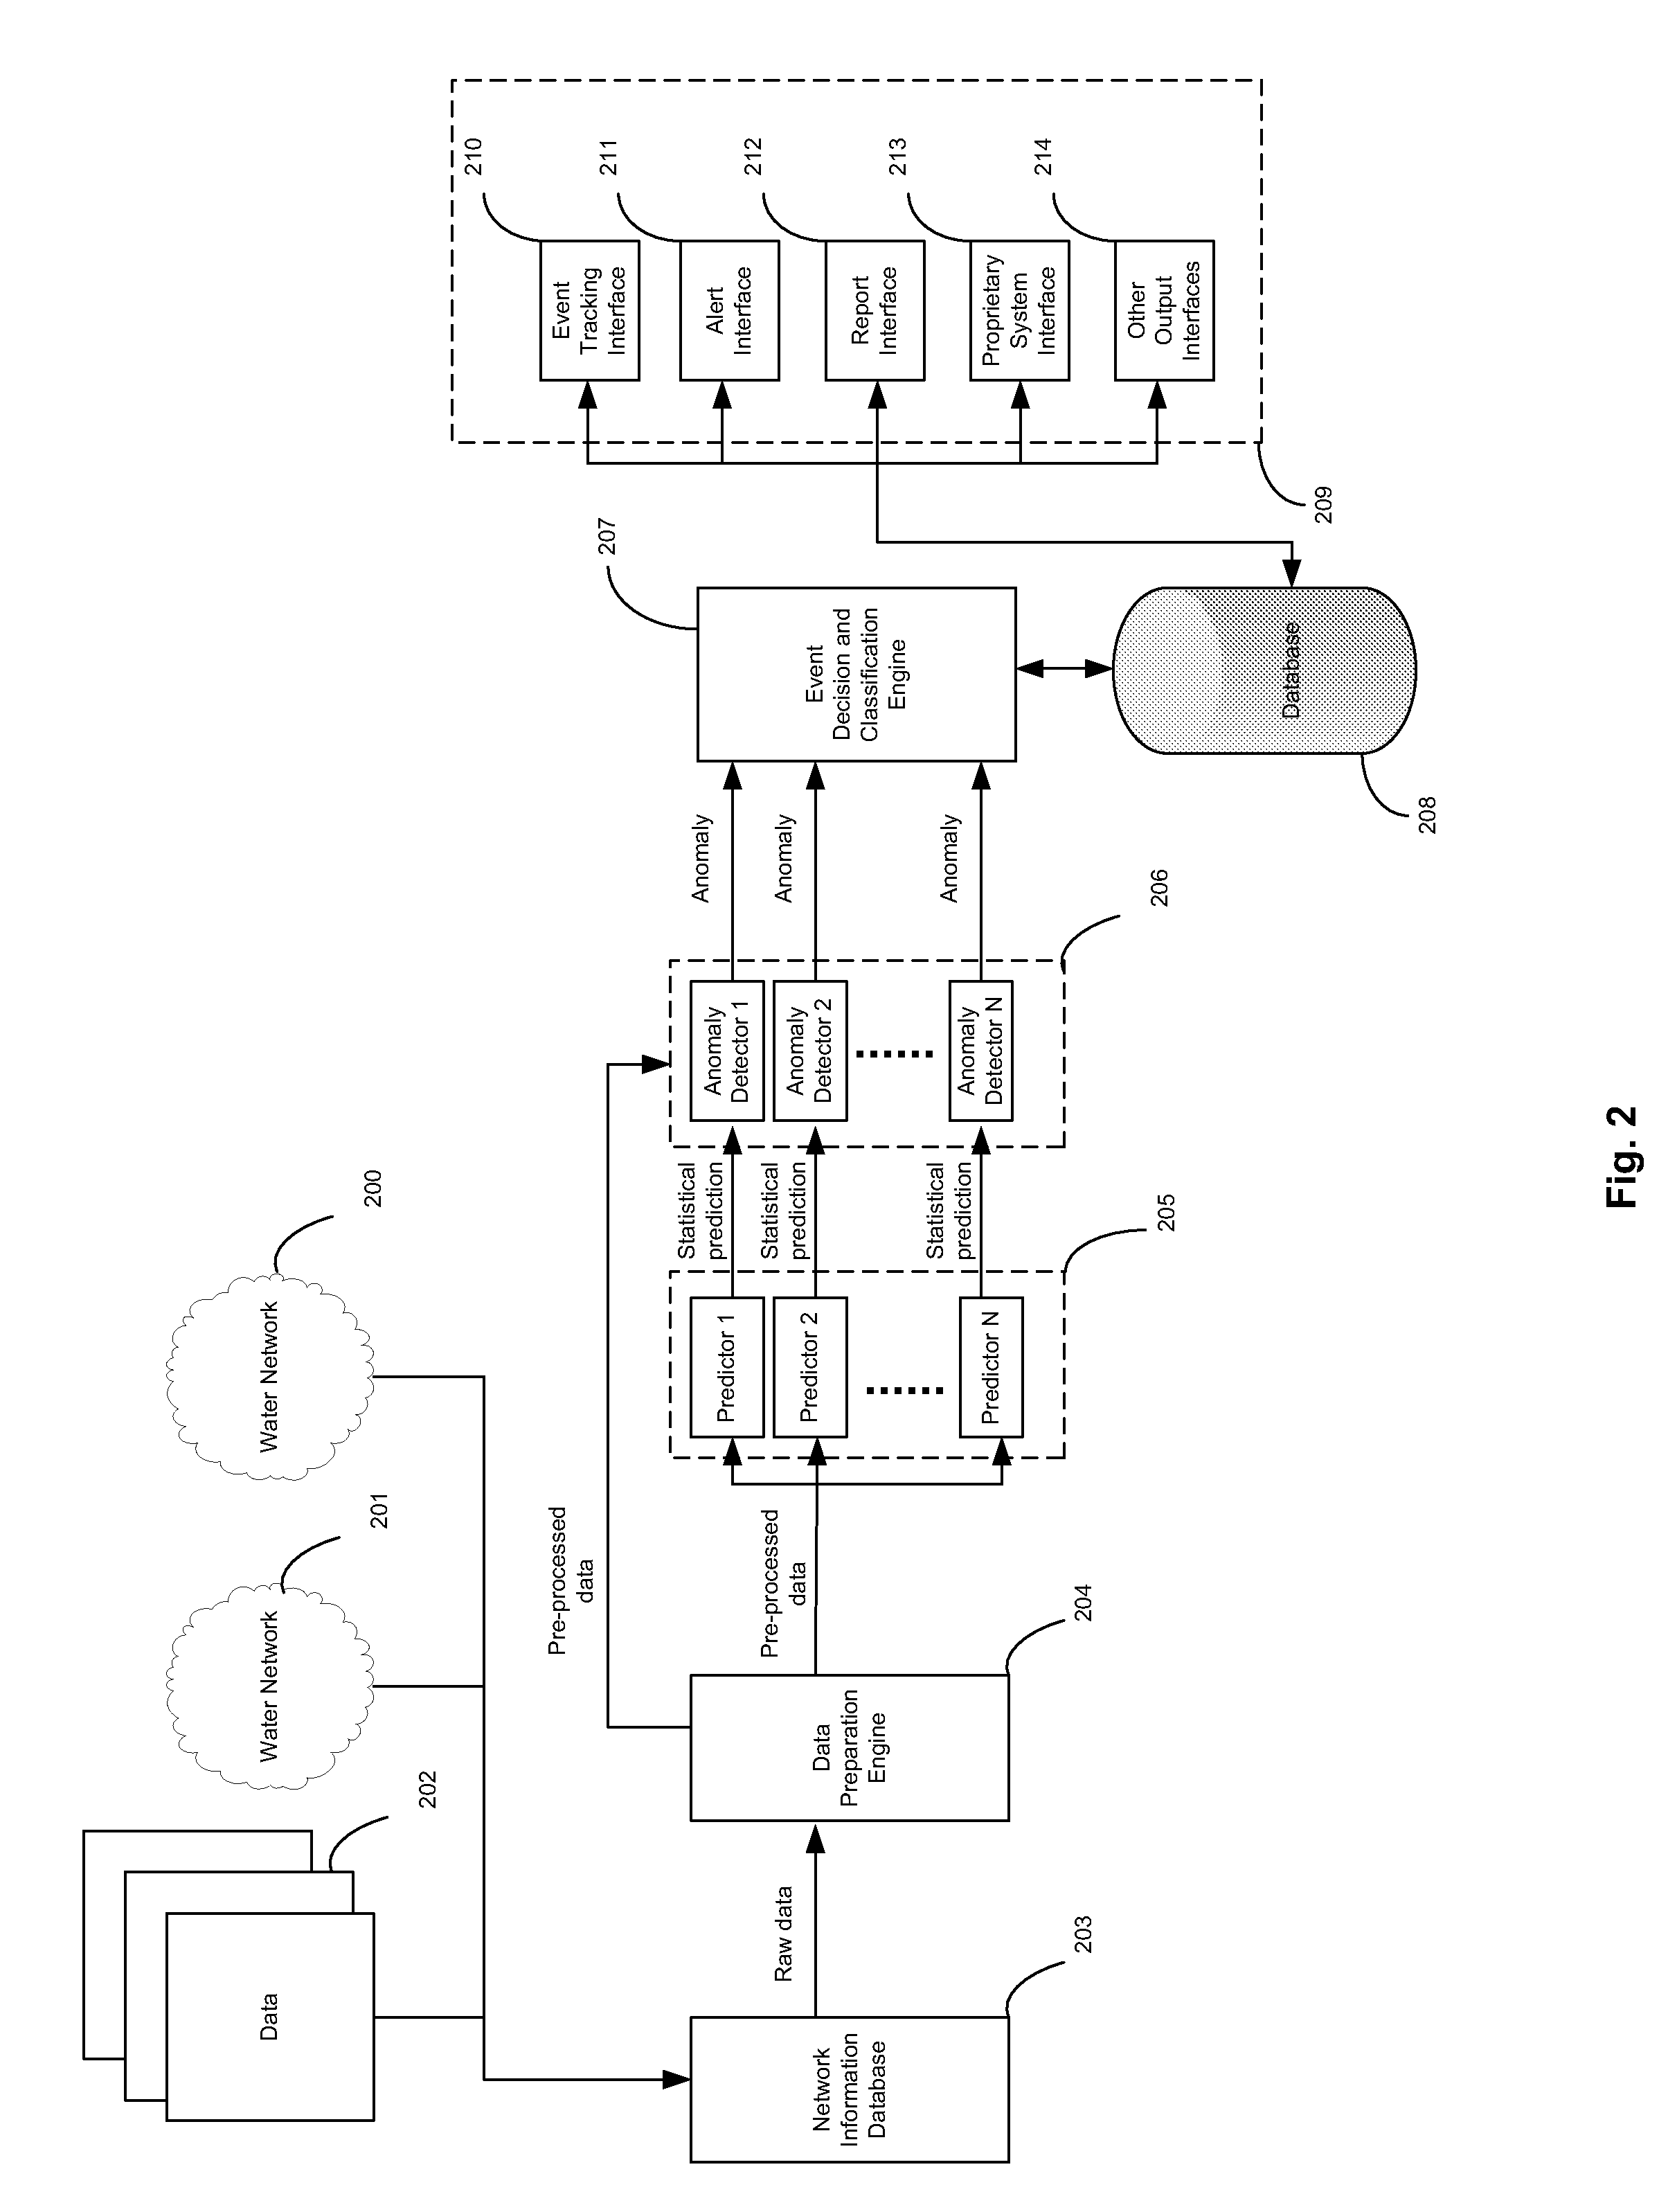 System and method for monitoring resources in a water utility network